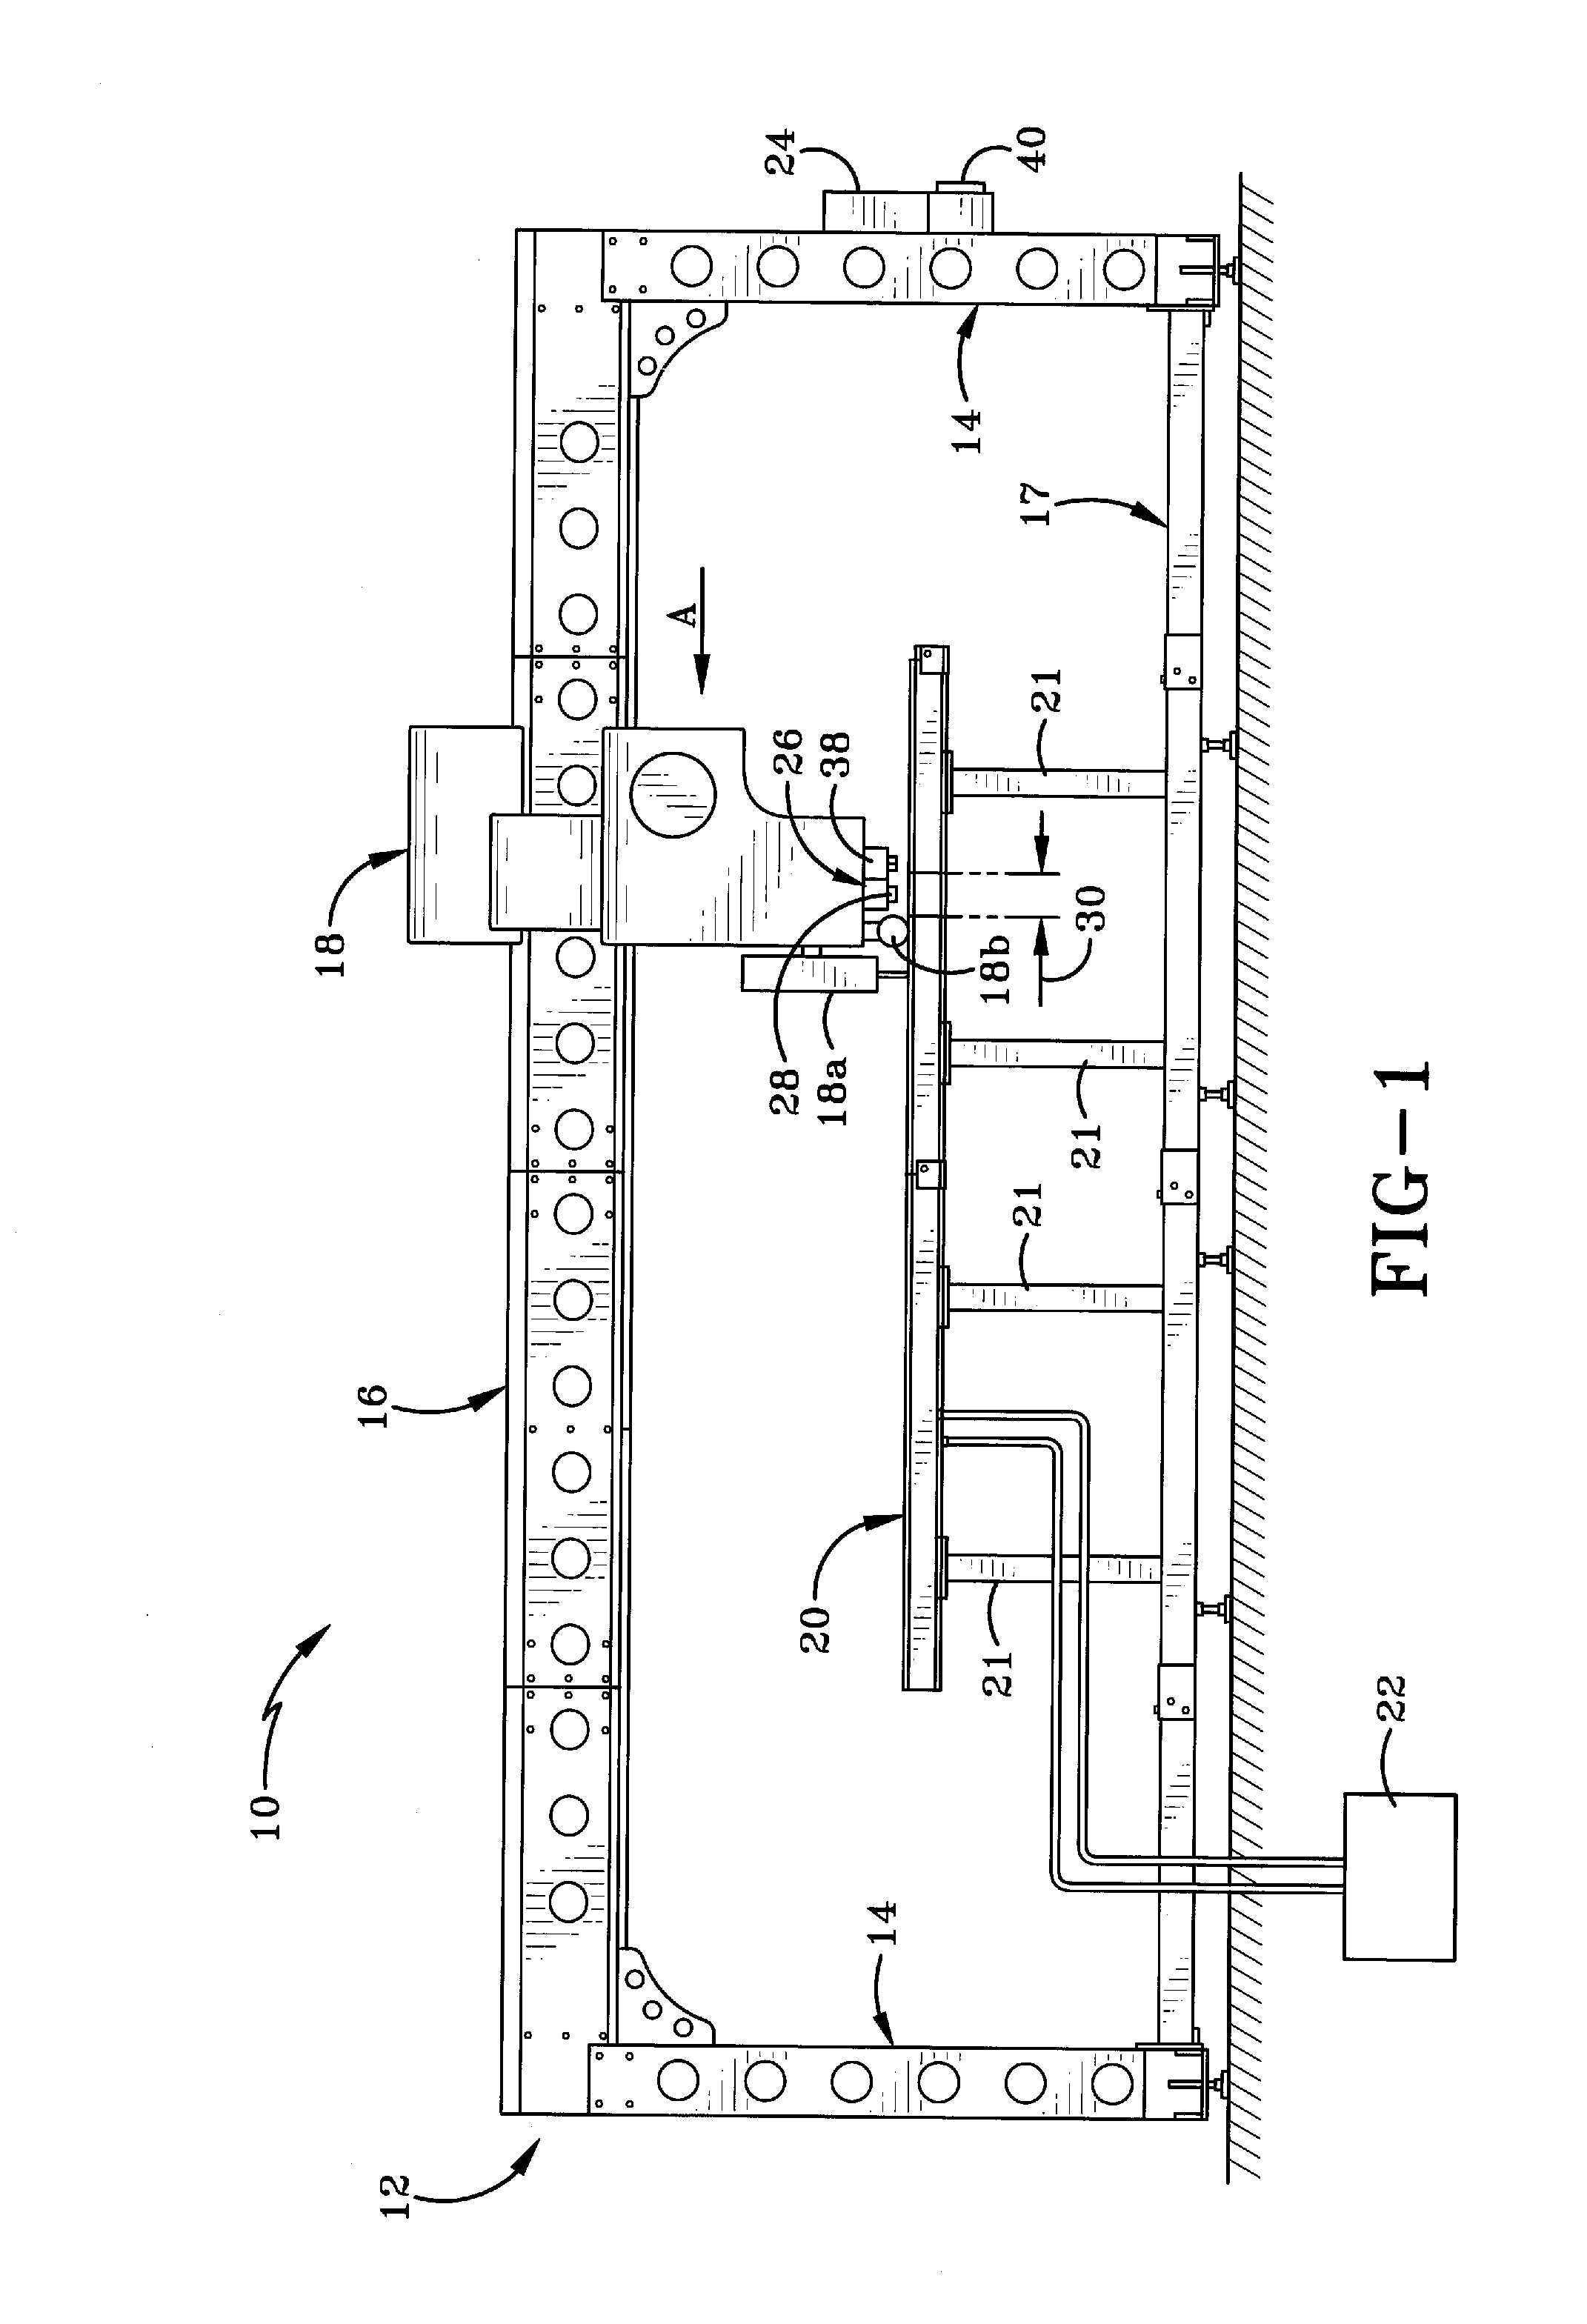 Method and apparatus for controlling welding of flexible fabrics